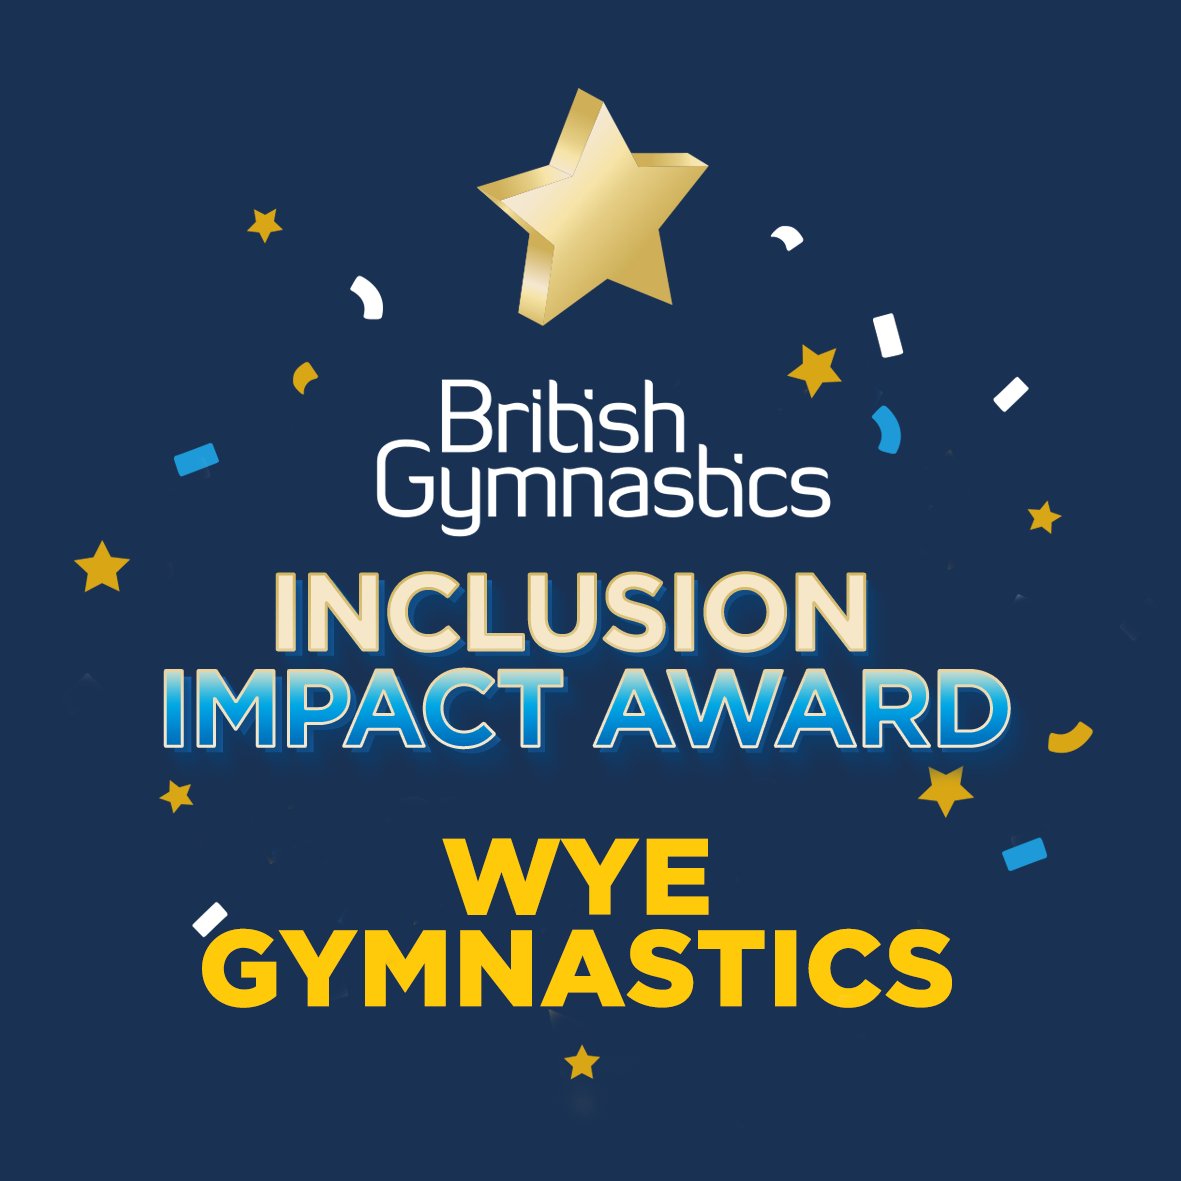 Congratulations to @WyeAndGalaxy on winning the Inclusion Impact Award 2023 👏

The judges loved your inclusion work, such as your Fit and Fed programme.

The judges also give a highly commended award to Wythall Gymnastics for their work in providing a fair experience for all.